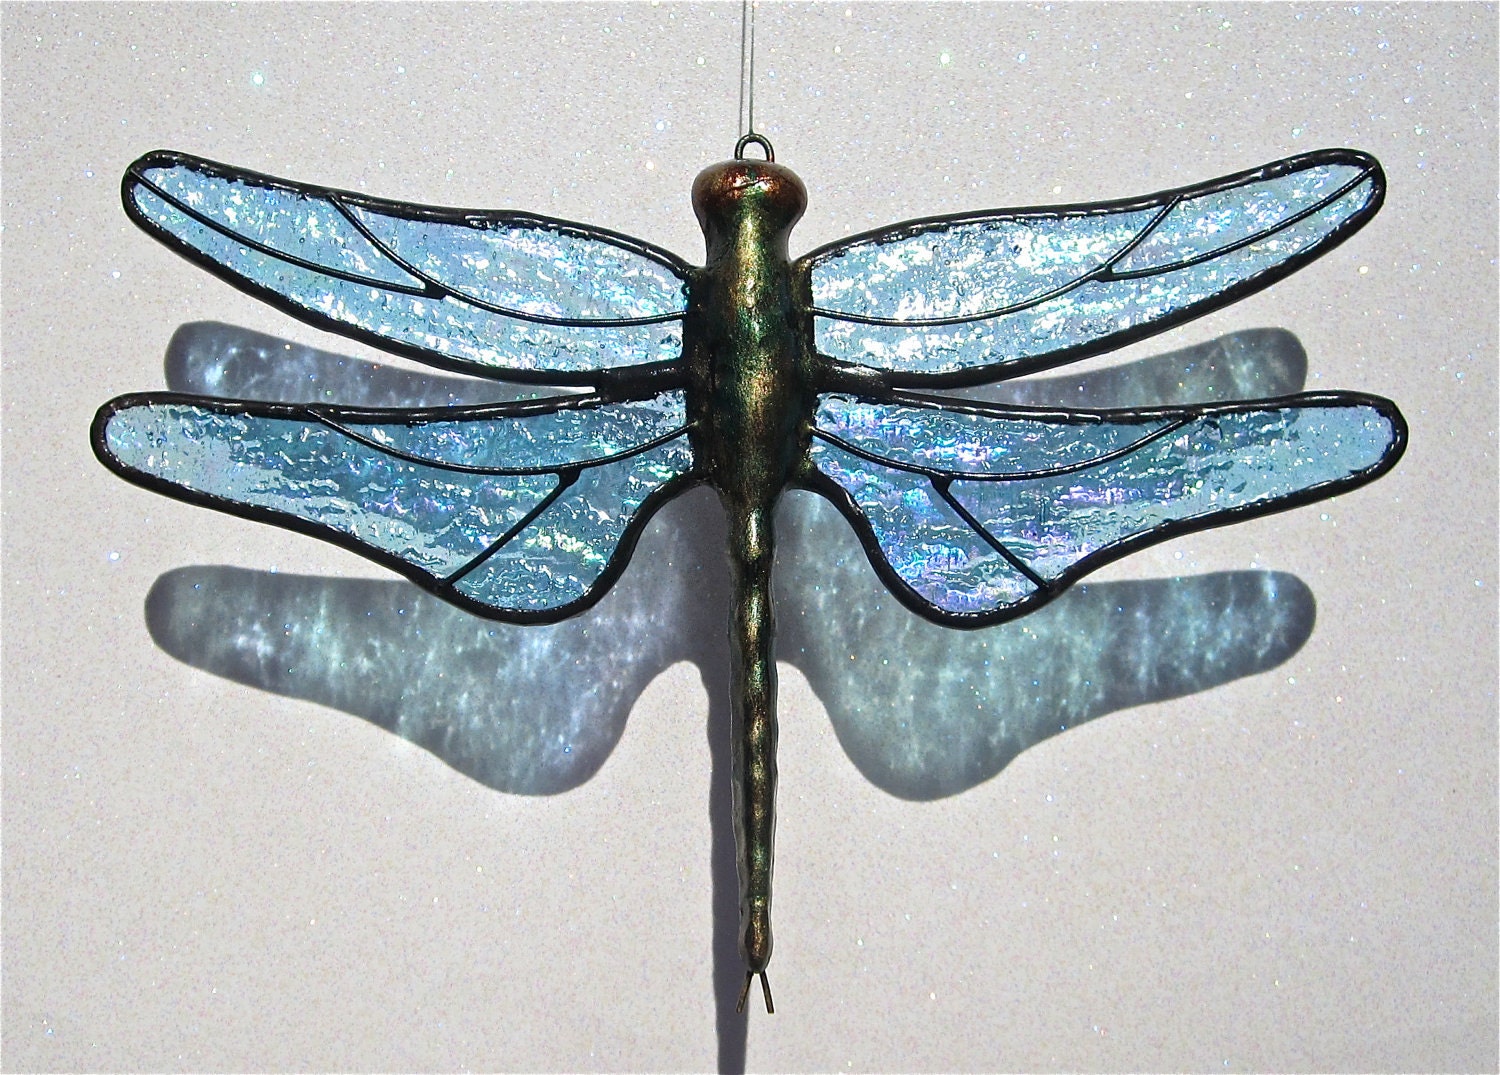 Stained Glass DRAGONFLY Suncatcher, Sparkling Light Ice Blue, Iridescent Wings & Handcast Metal Body, USA Handmade - stainedglasswhimsy